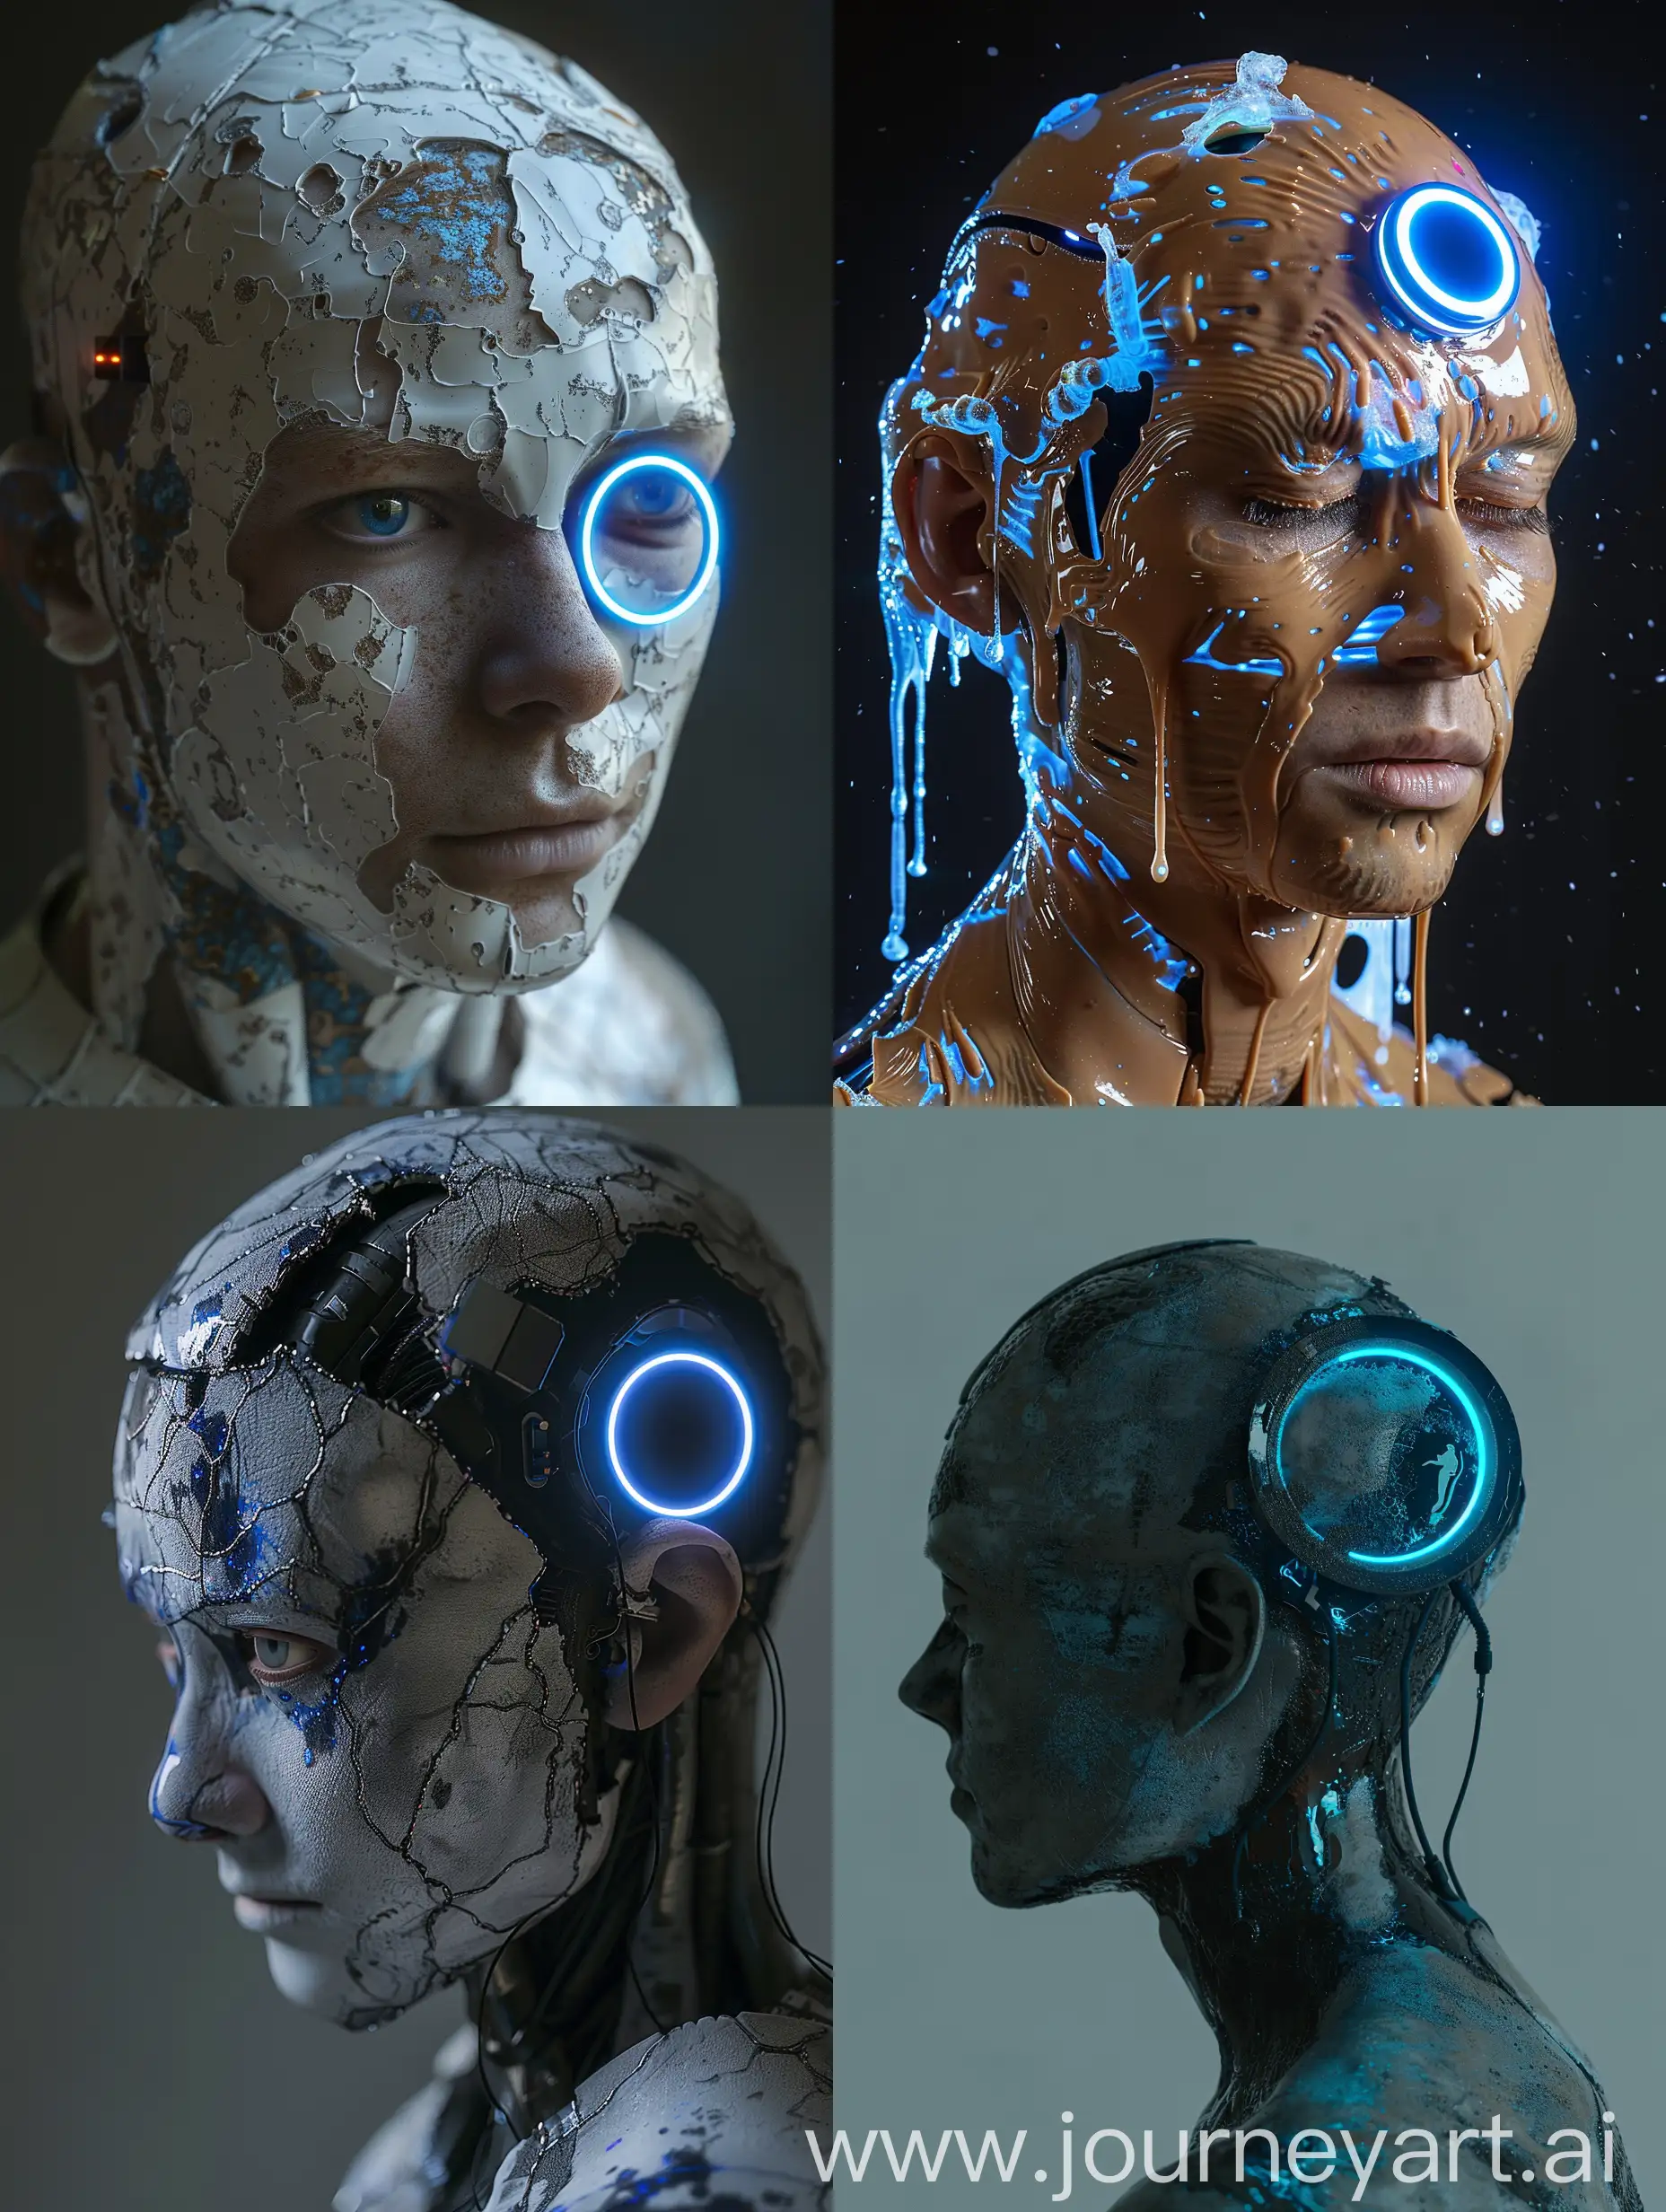 The human-like outer skin is made up of a synthetic fluid that covers the body. On their right temple, they bear a circular LED that visibly identifies them as androids and lights up in blue.

